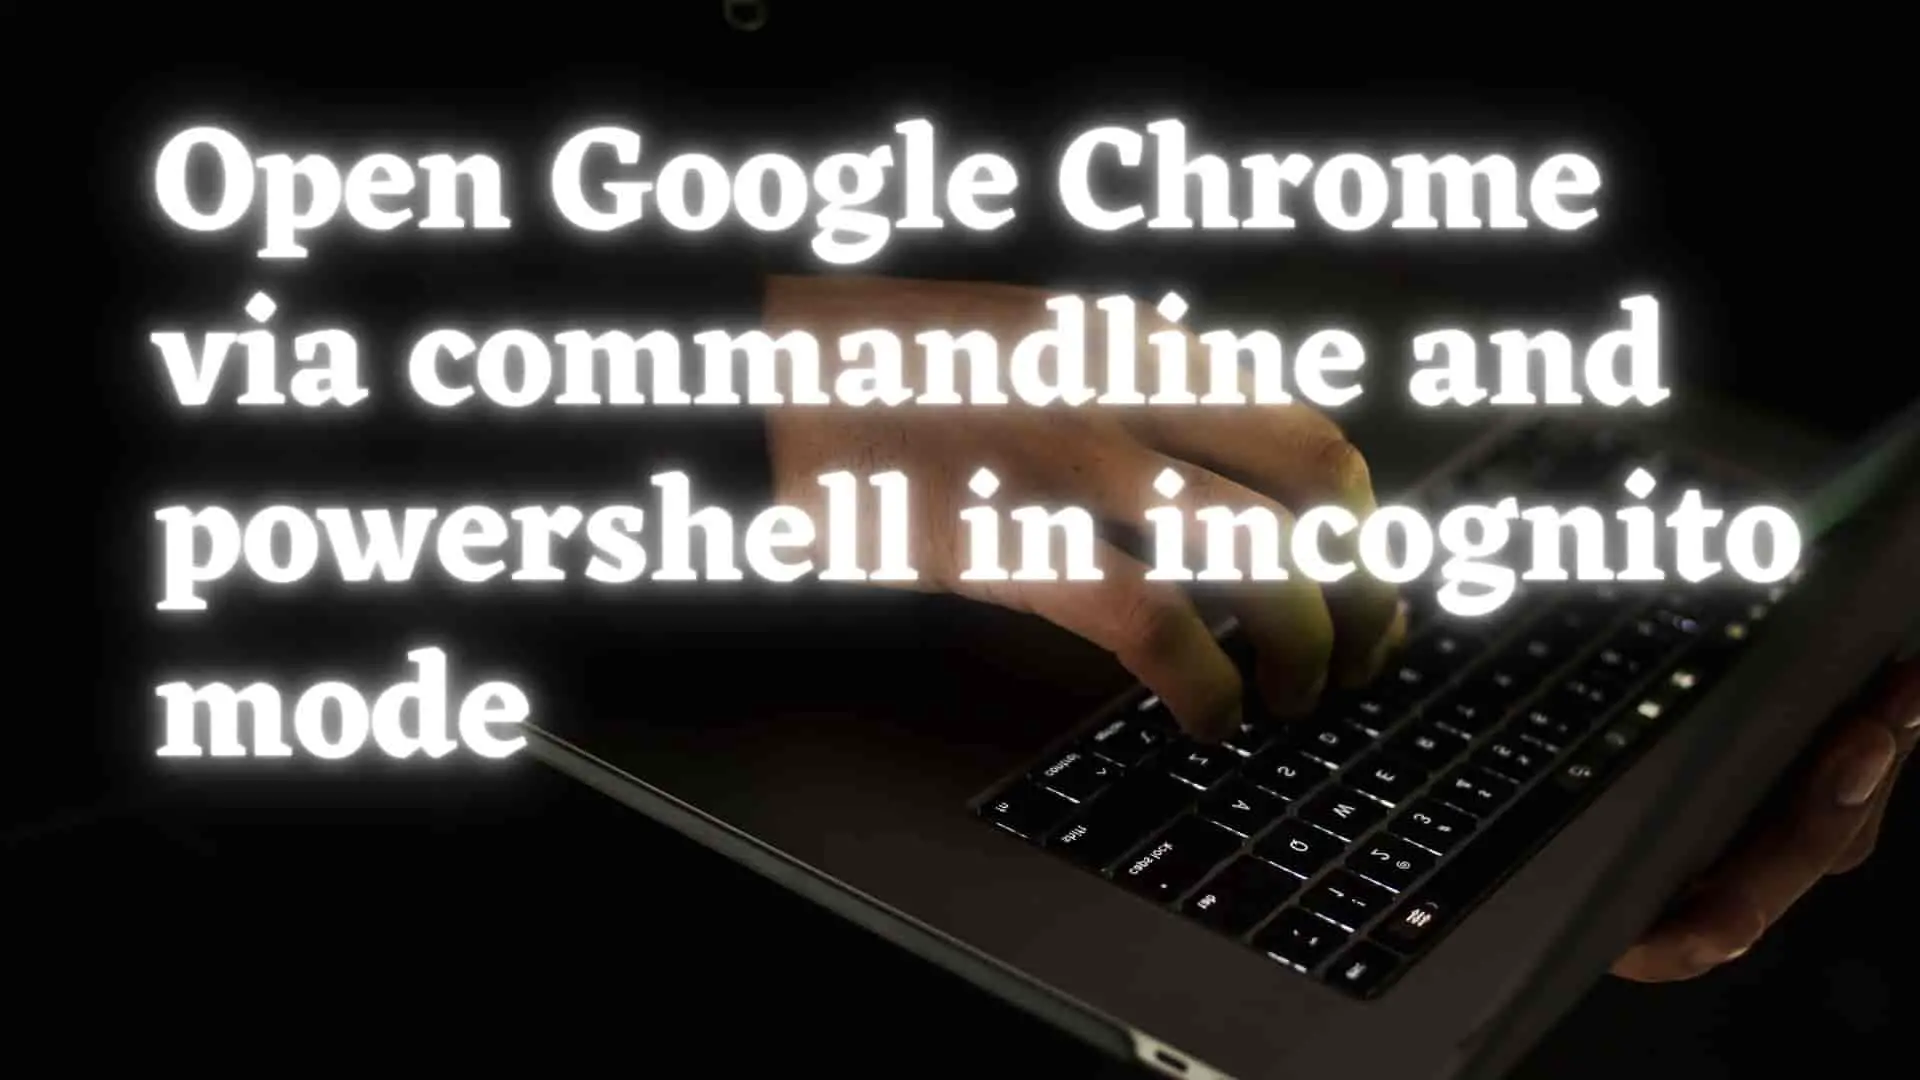 open-chrome-in-incognito-with-commandline-powershell